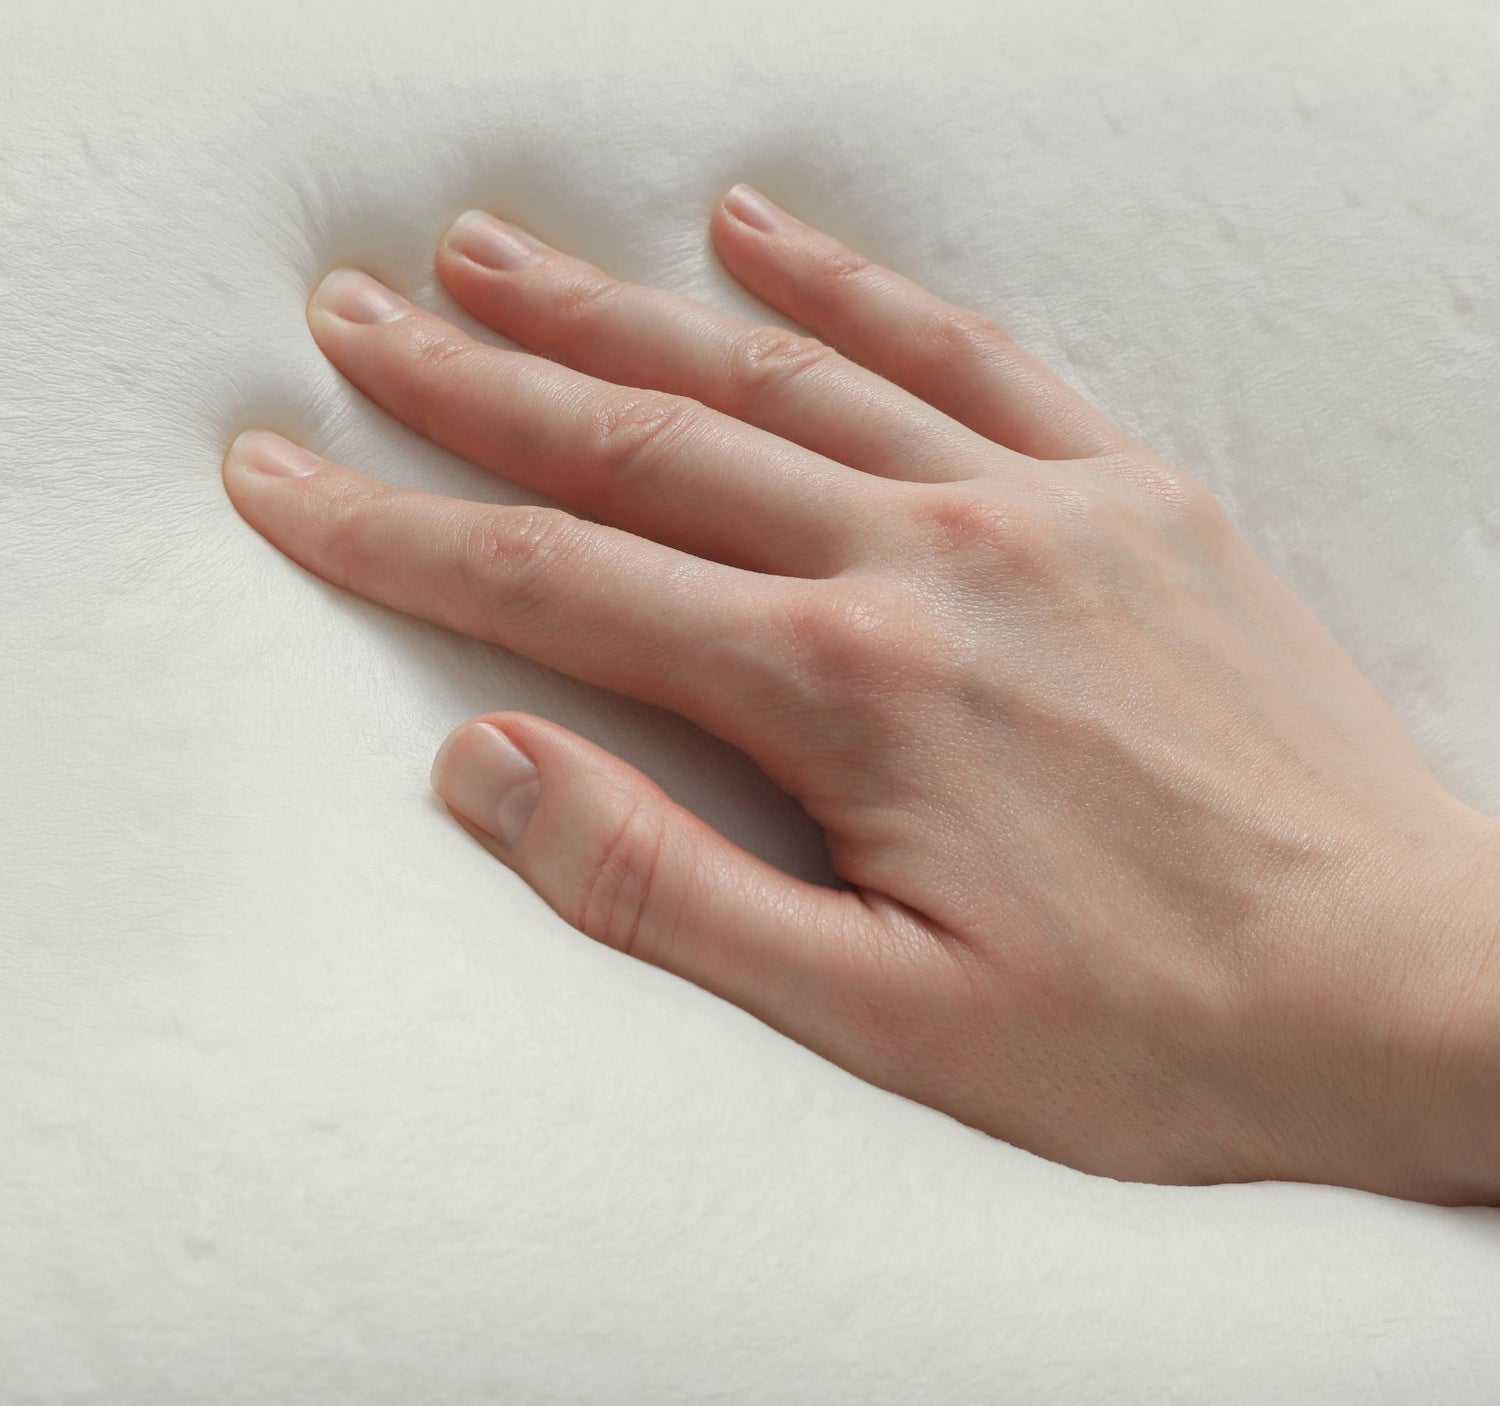 Hand pressing down on a layer of memory foam, demonstrating its responsiveness and contouring properties